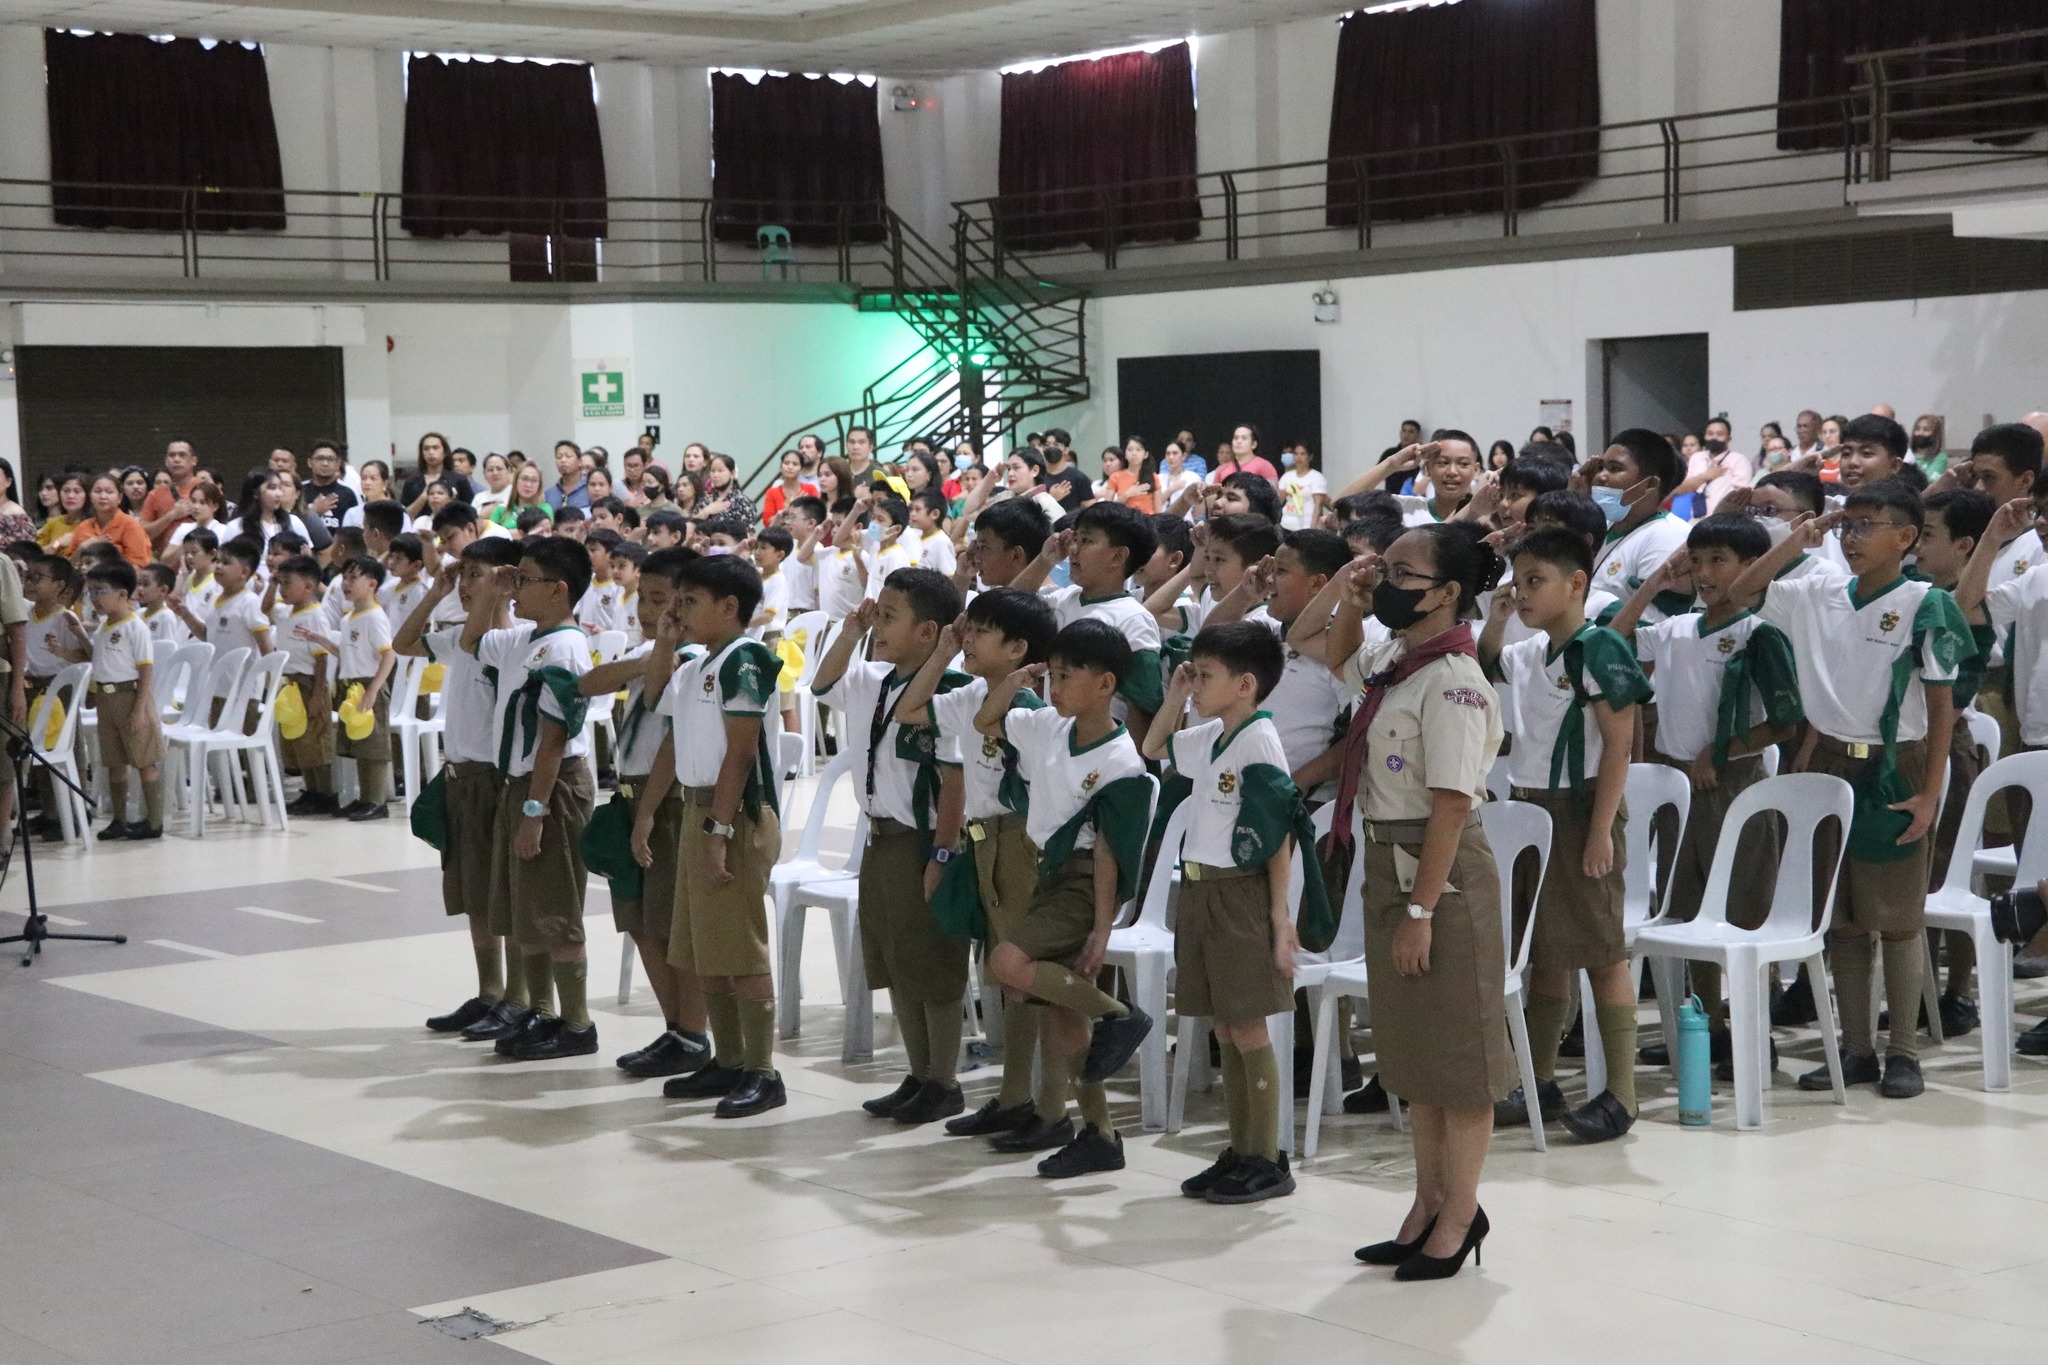 PWC Basic Education Department’s KID, KAB, and TROOP Scouts Investiture Ceremonies